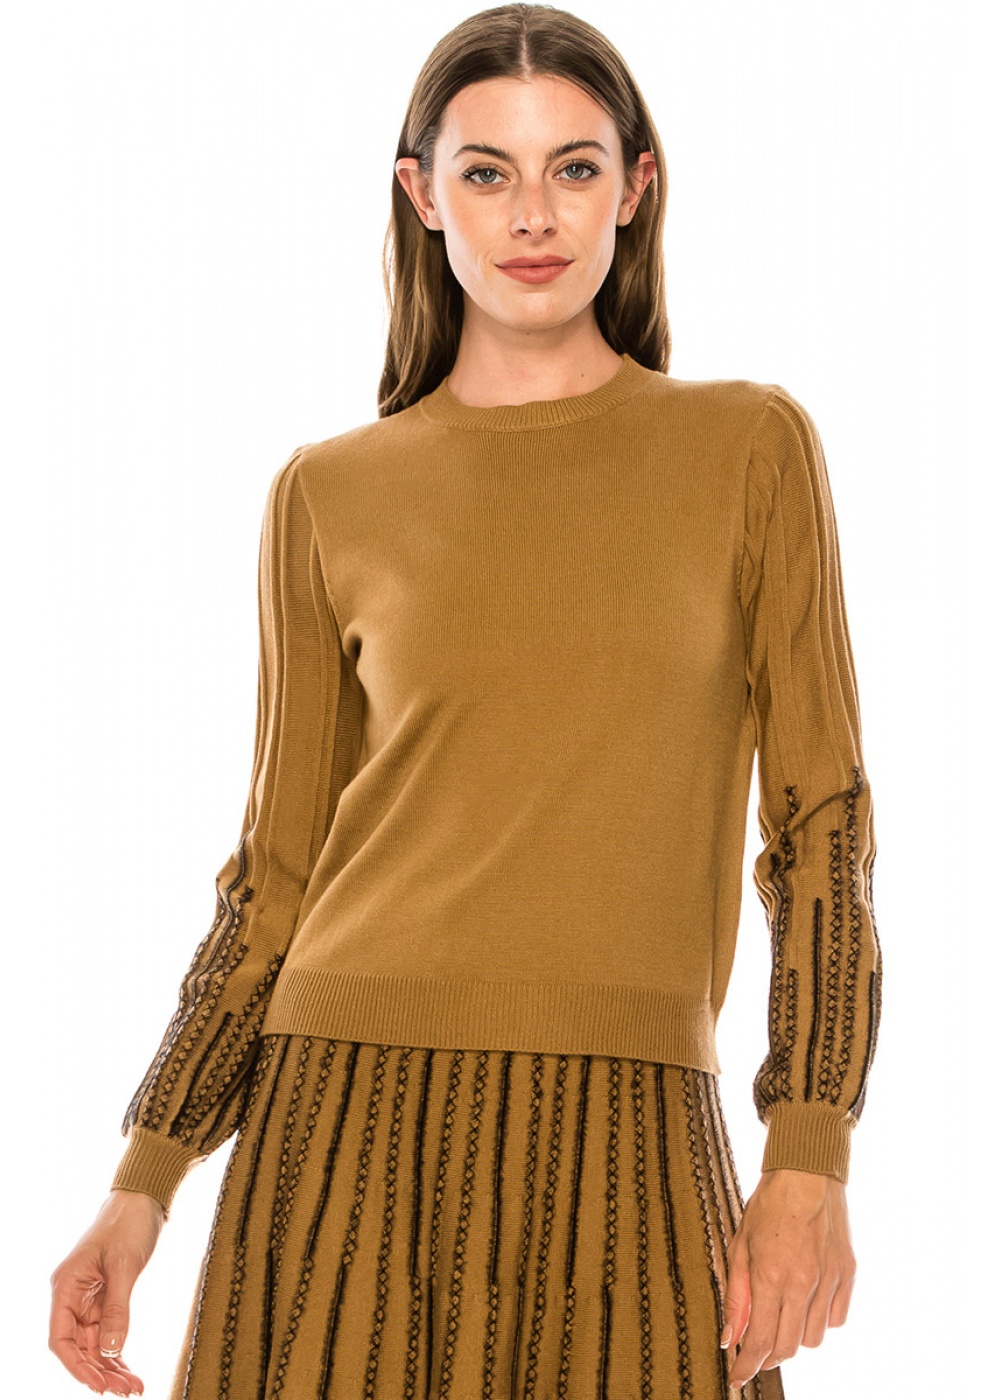 Camel sweater with embroidery on sleeves